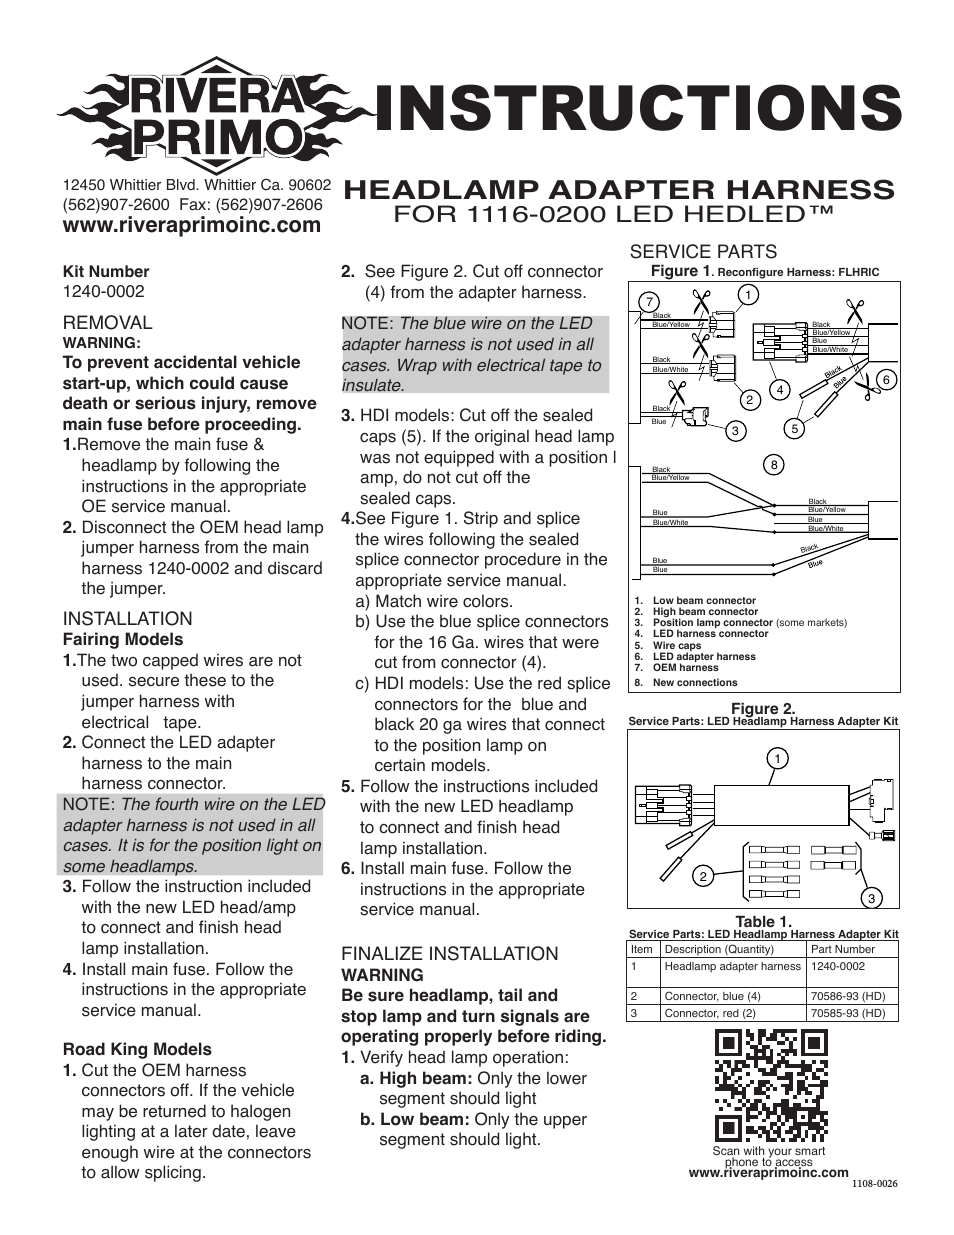 Headlamp Adapter Harness for 1116-0200 LED HEDLED